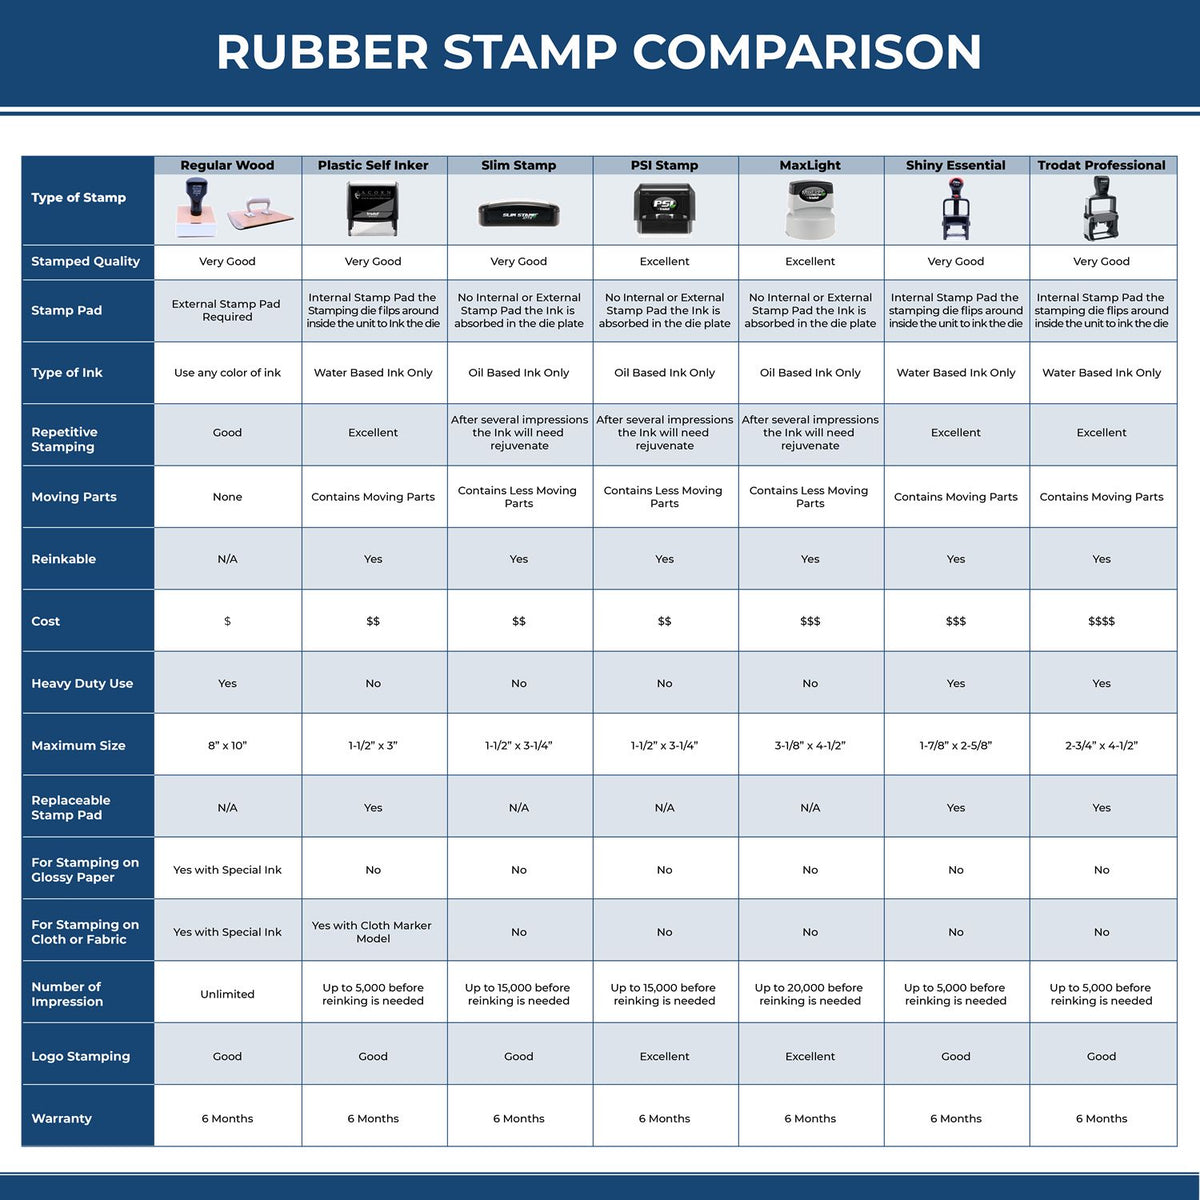 A comparison chart for the different types of mount models available for the Heavy-Duty Virginia Rectangular Notary Stamp.